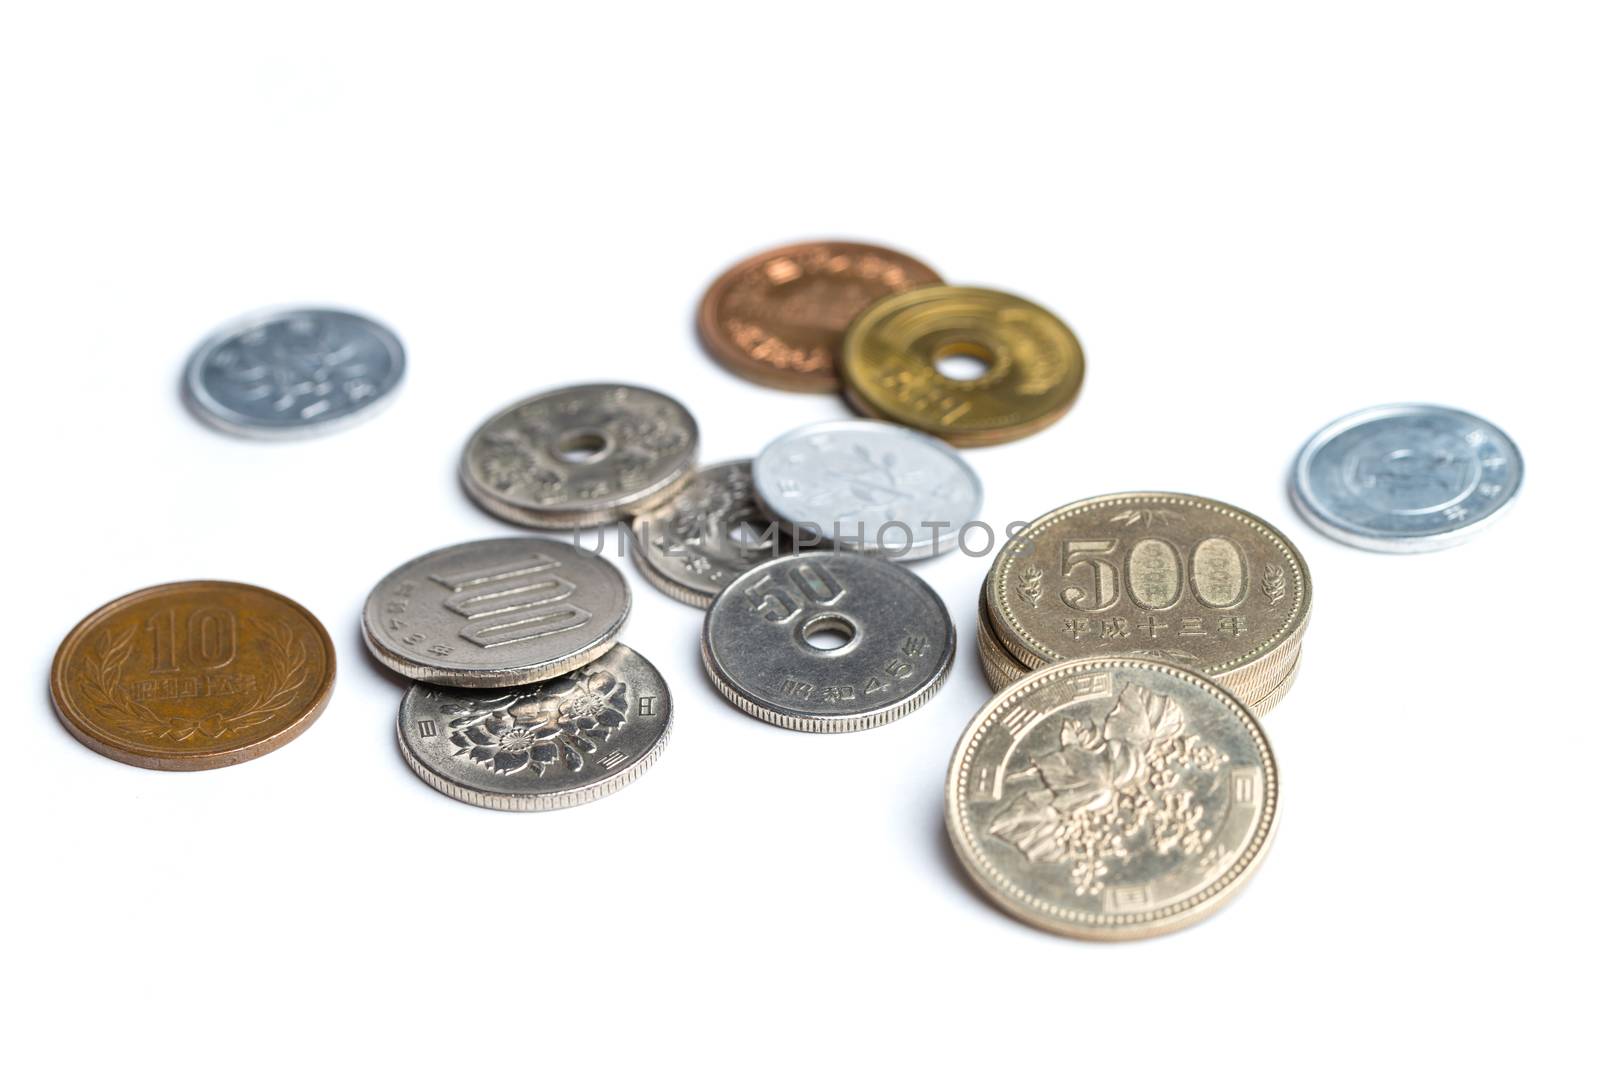 A mix of Japanese Yen coins spread out on a white background.